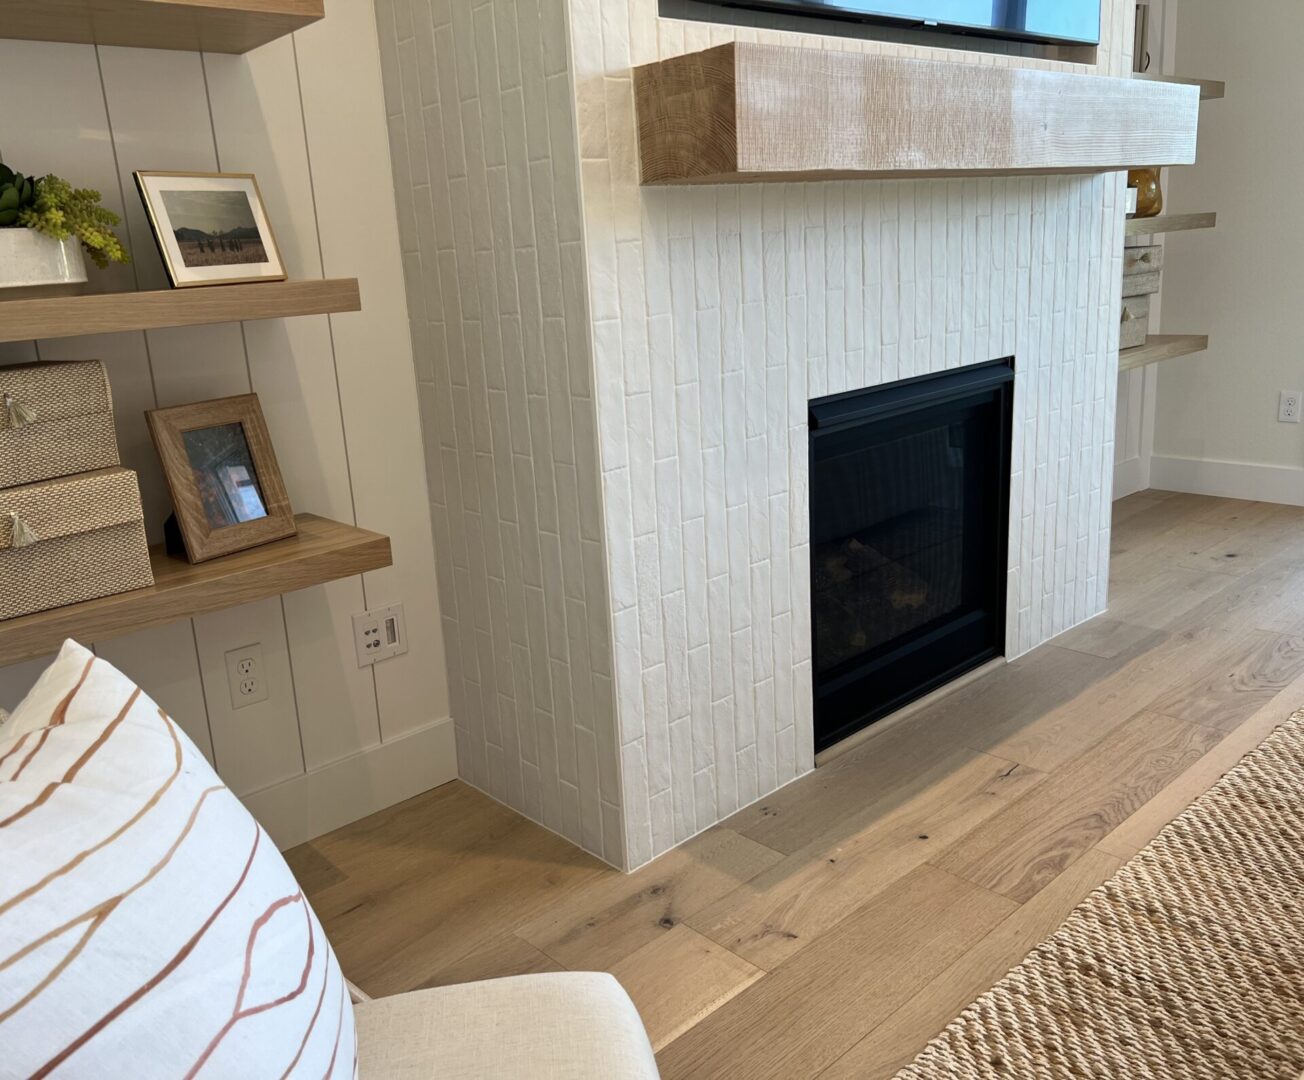 A fireplace with a tv above it and wooden shelves.